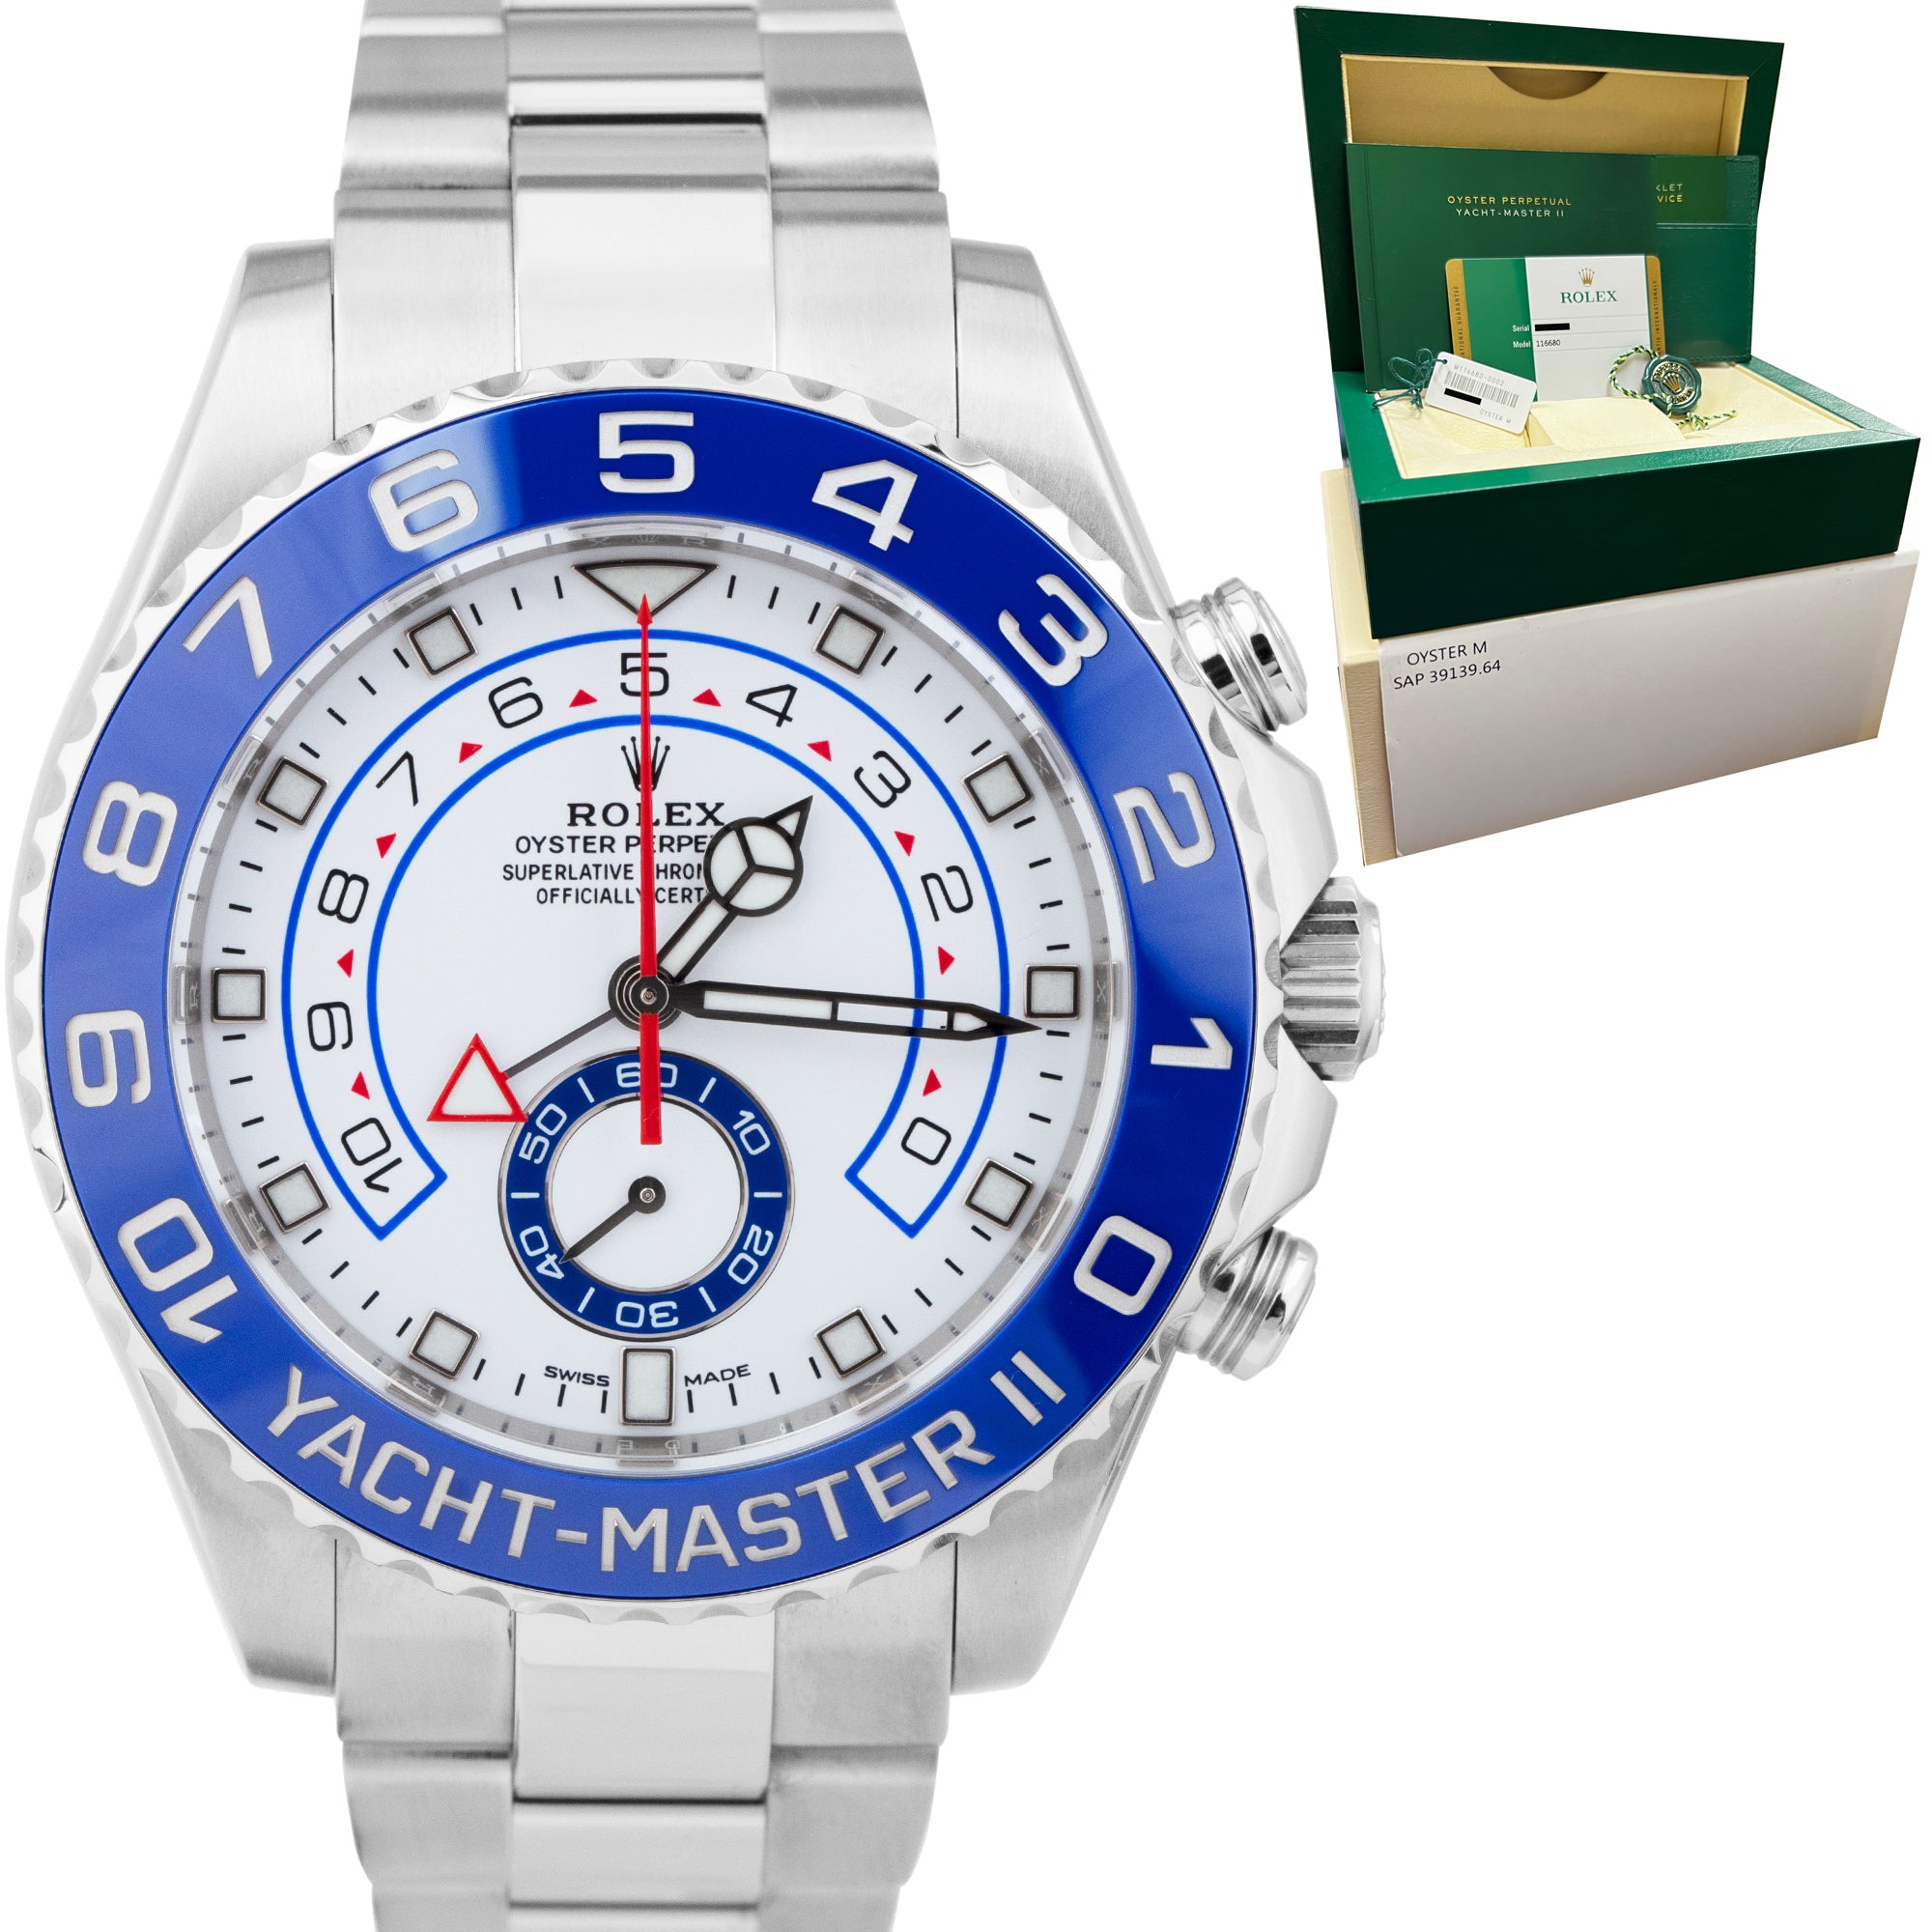 2019 Rolex Yacht-Master II 44mm NEWEST HANDS Stainless White 116680 Watch B+P